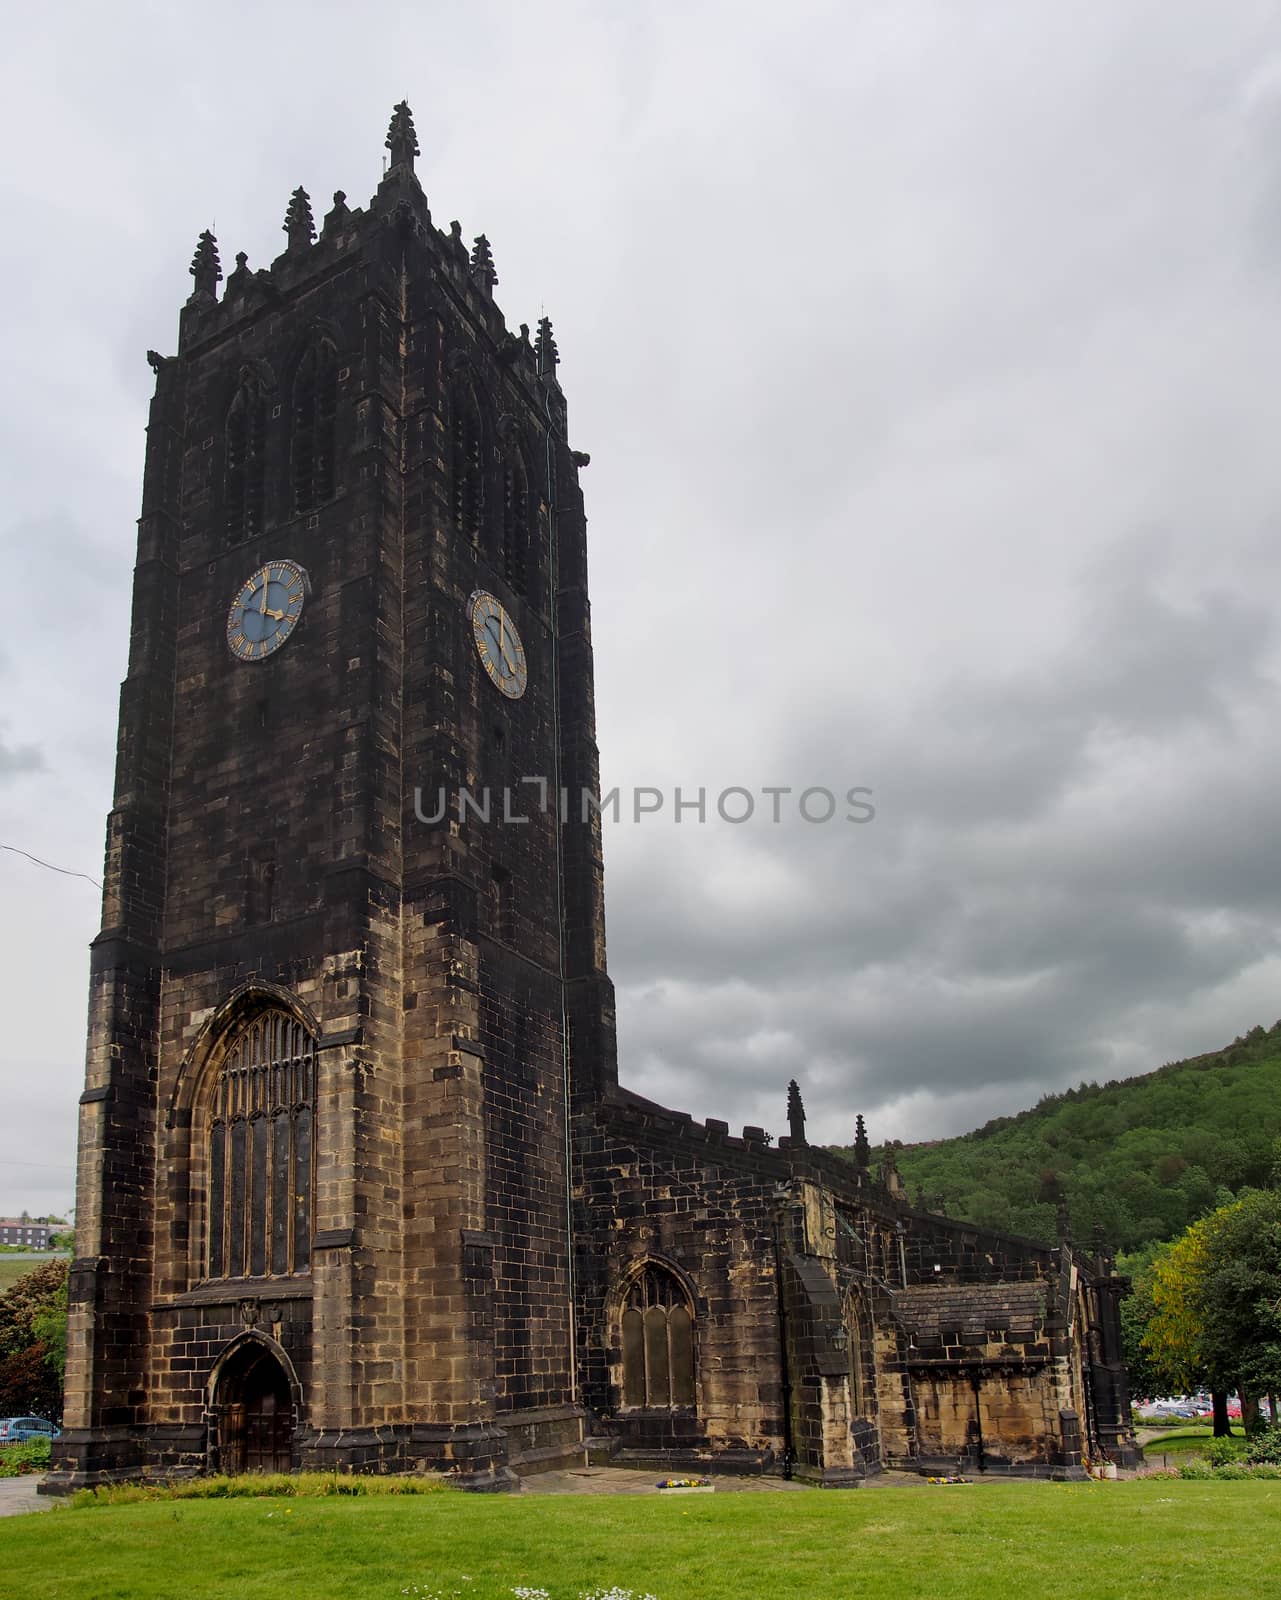 halifax minster in west yorkshire a medieval church formerly a parish known as saint john the baptist completed in 1438 by philopenshaw